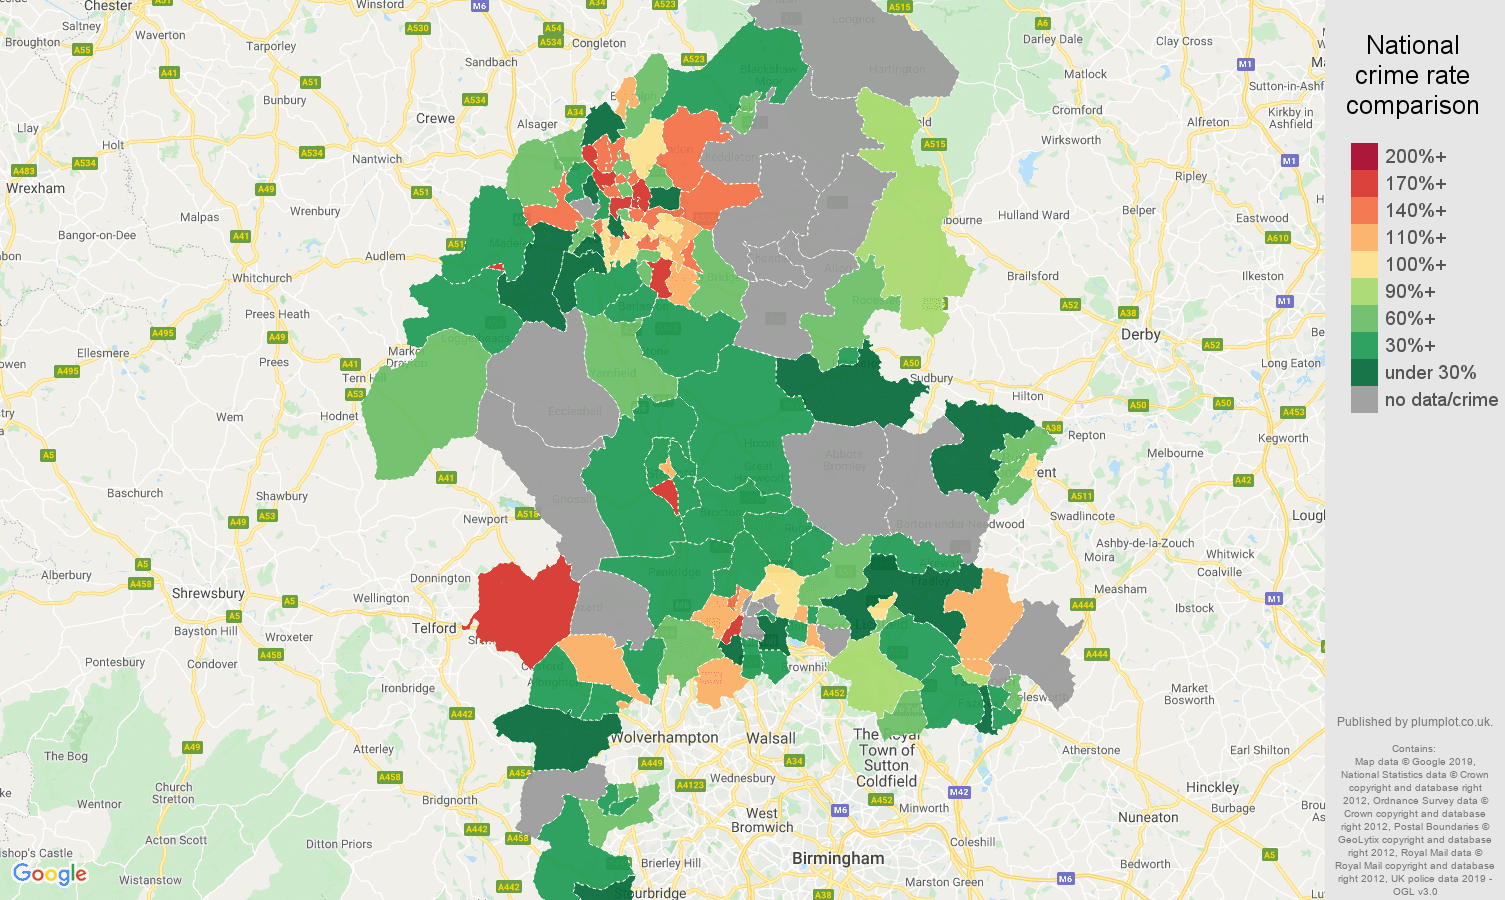 Staffordshire possession of weapons crime rate comparison map